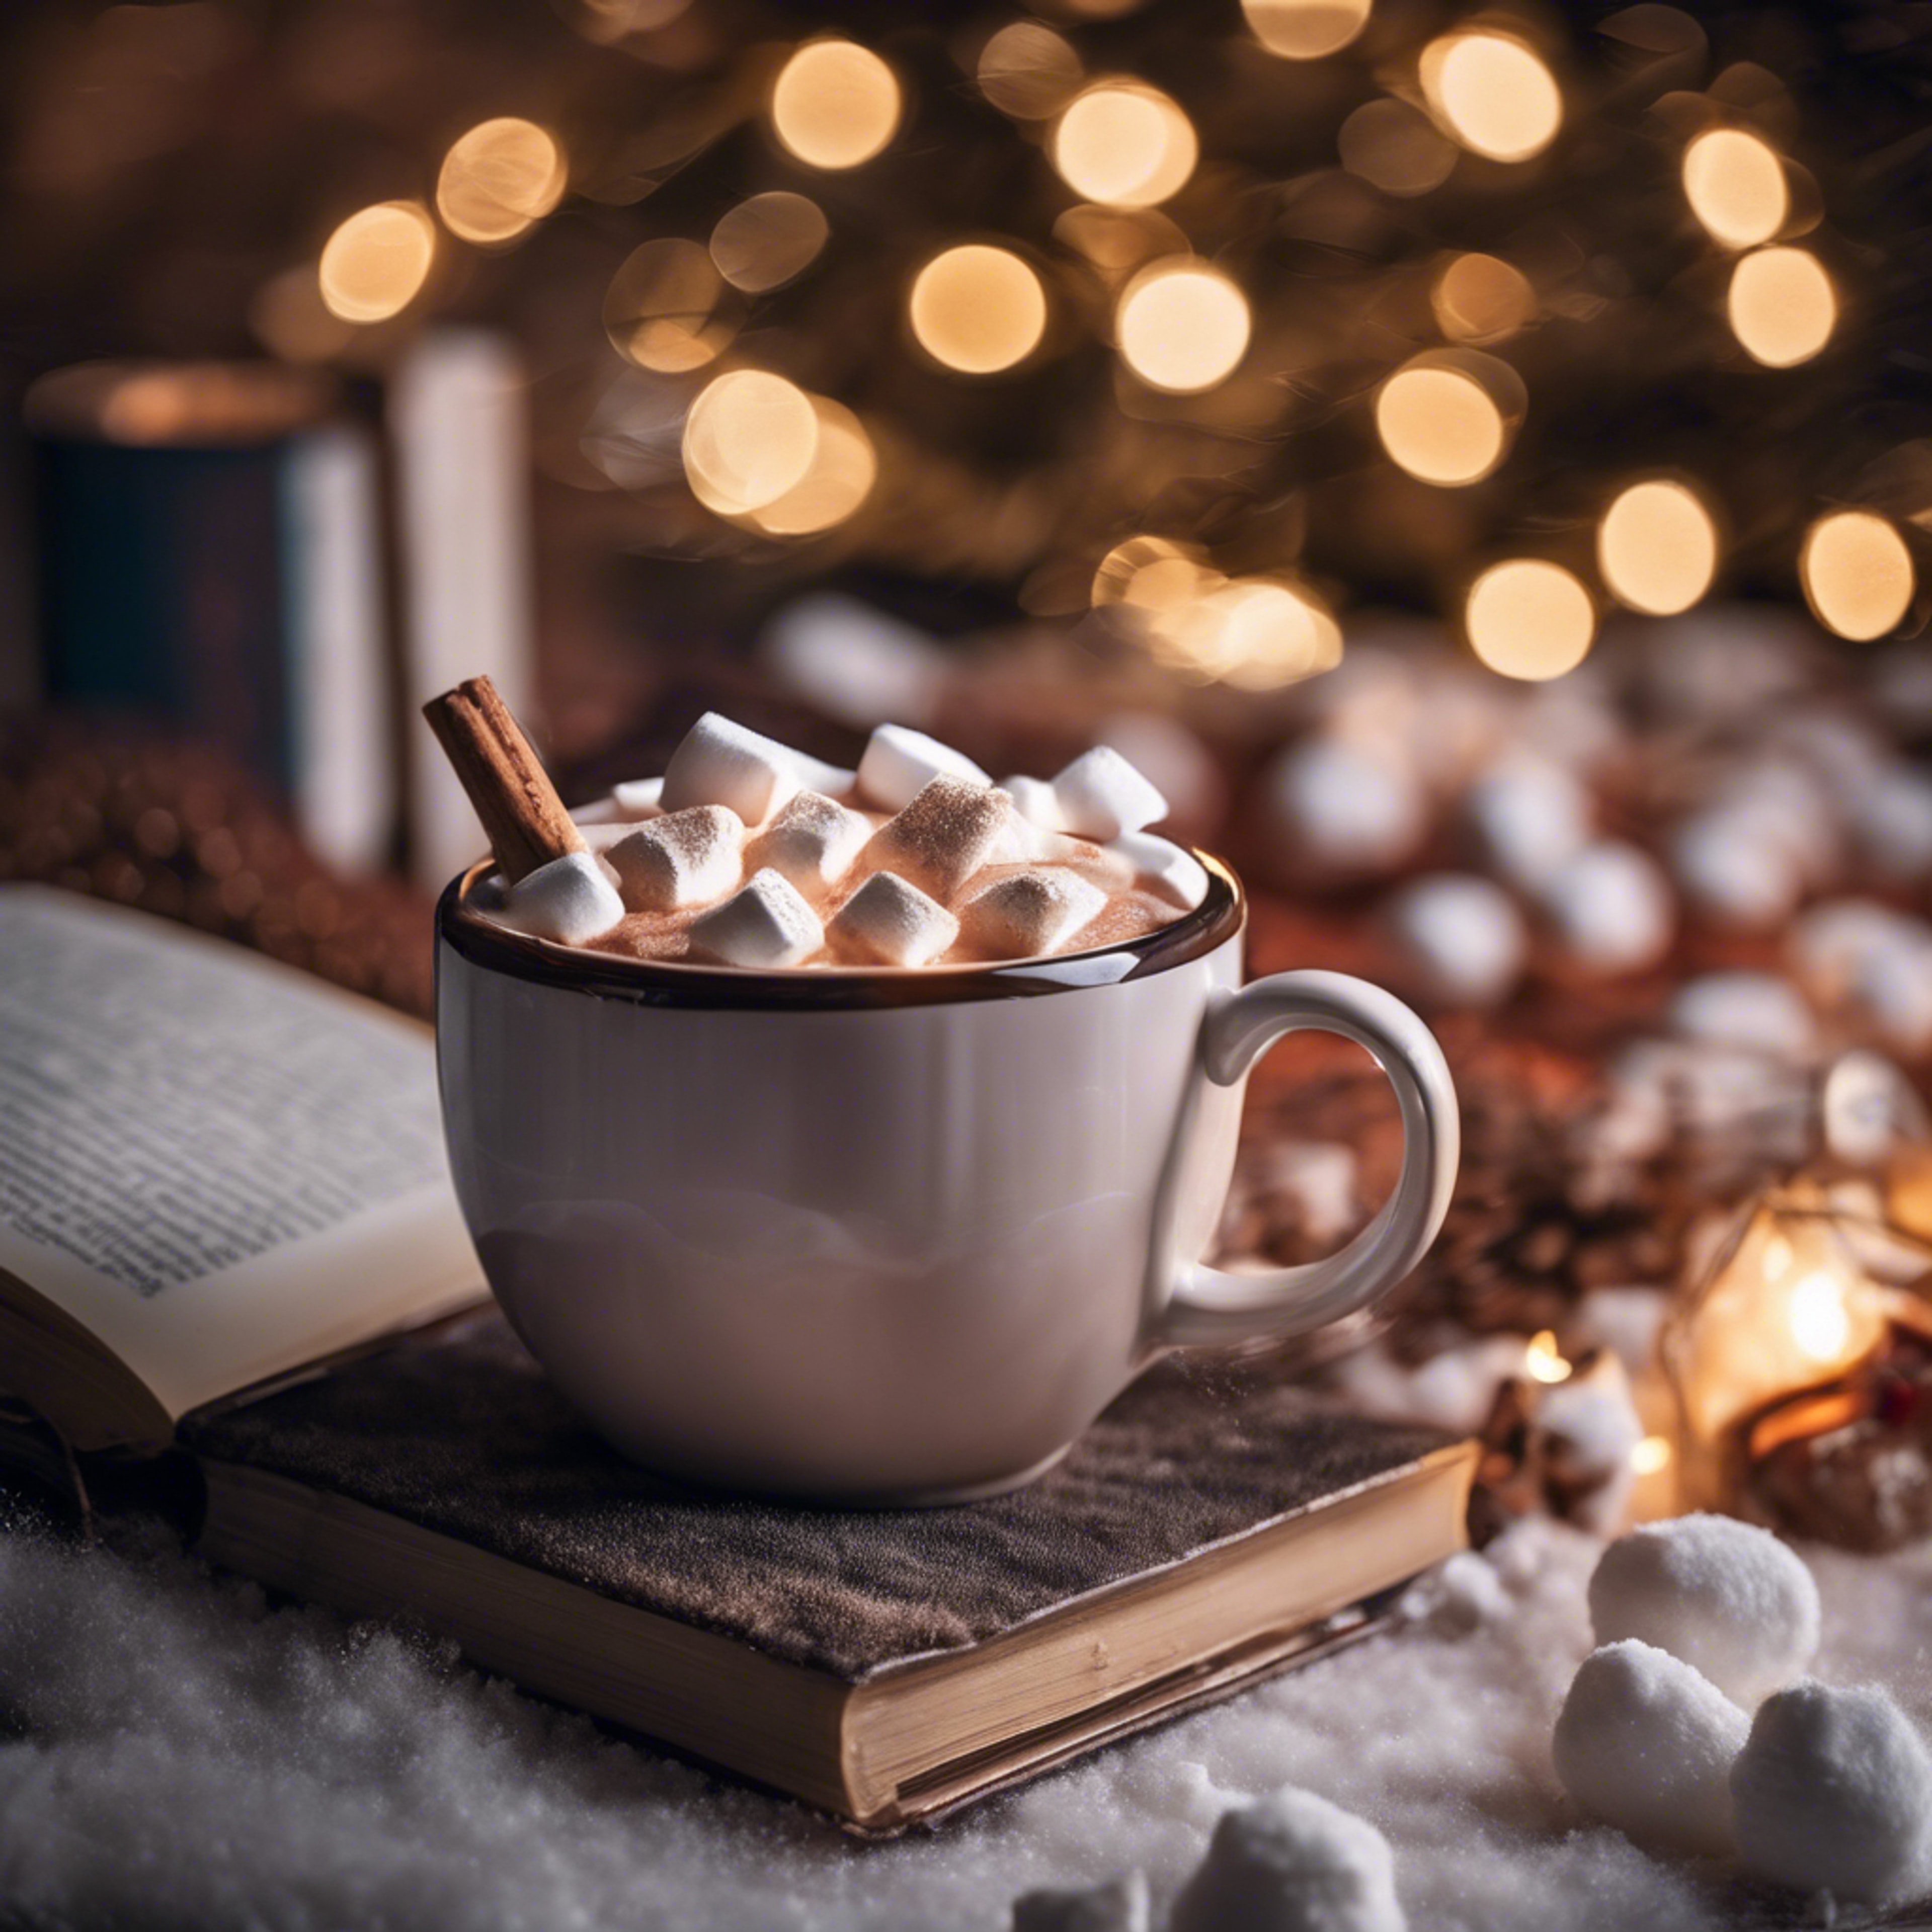 A steaming mug of hot cocoa topped with marshmallows, paired with a good book on a winter night. Sfondo[bb1918feb58c4b029e23]